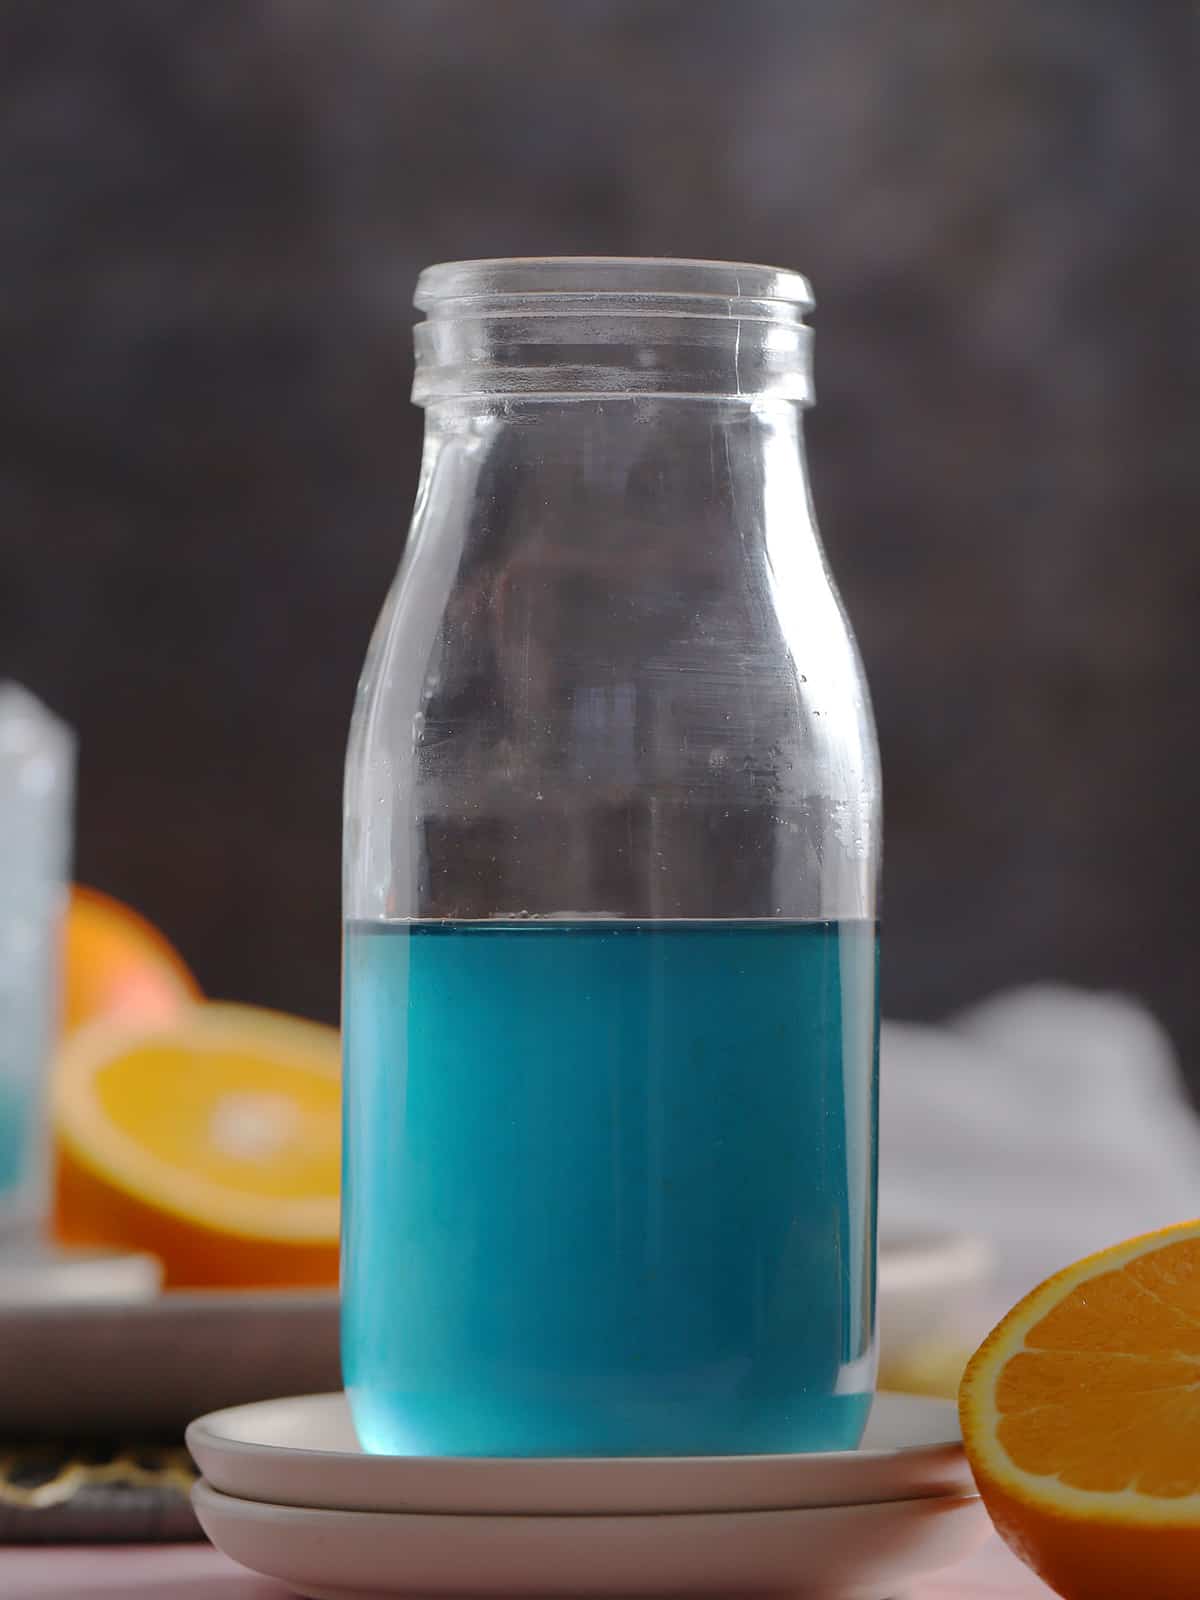 A glass bottle filled with blue Curaçao syrup.